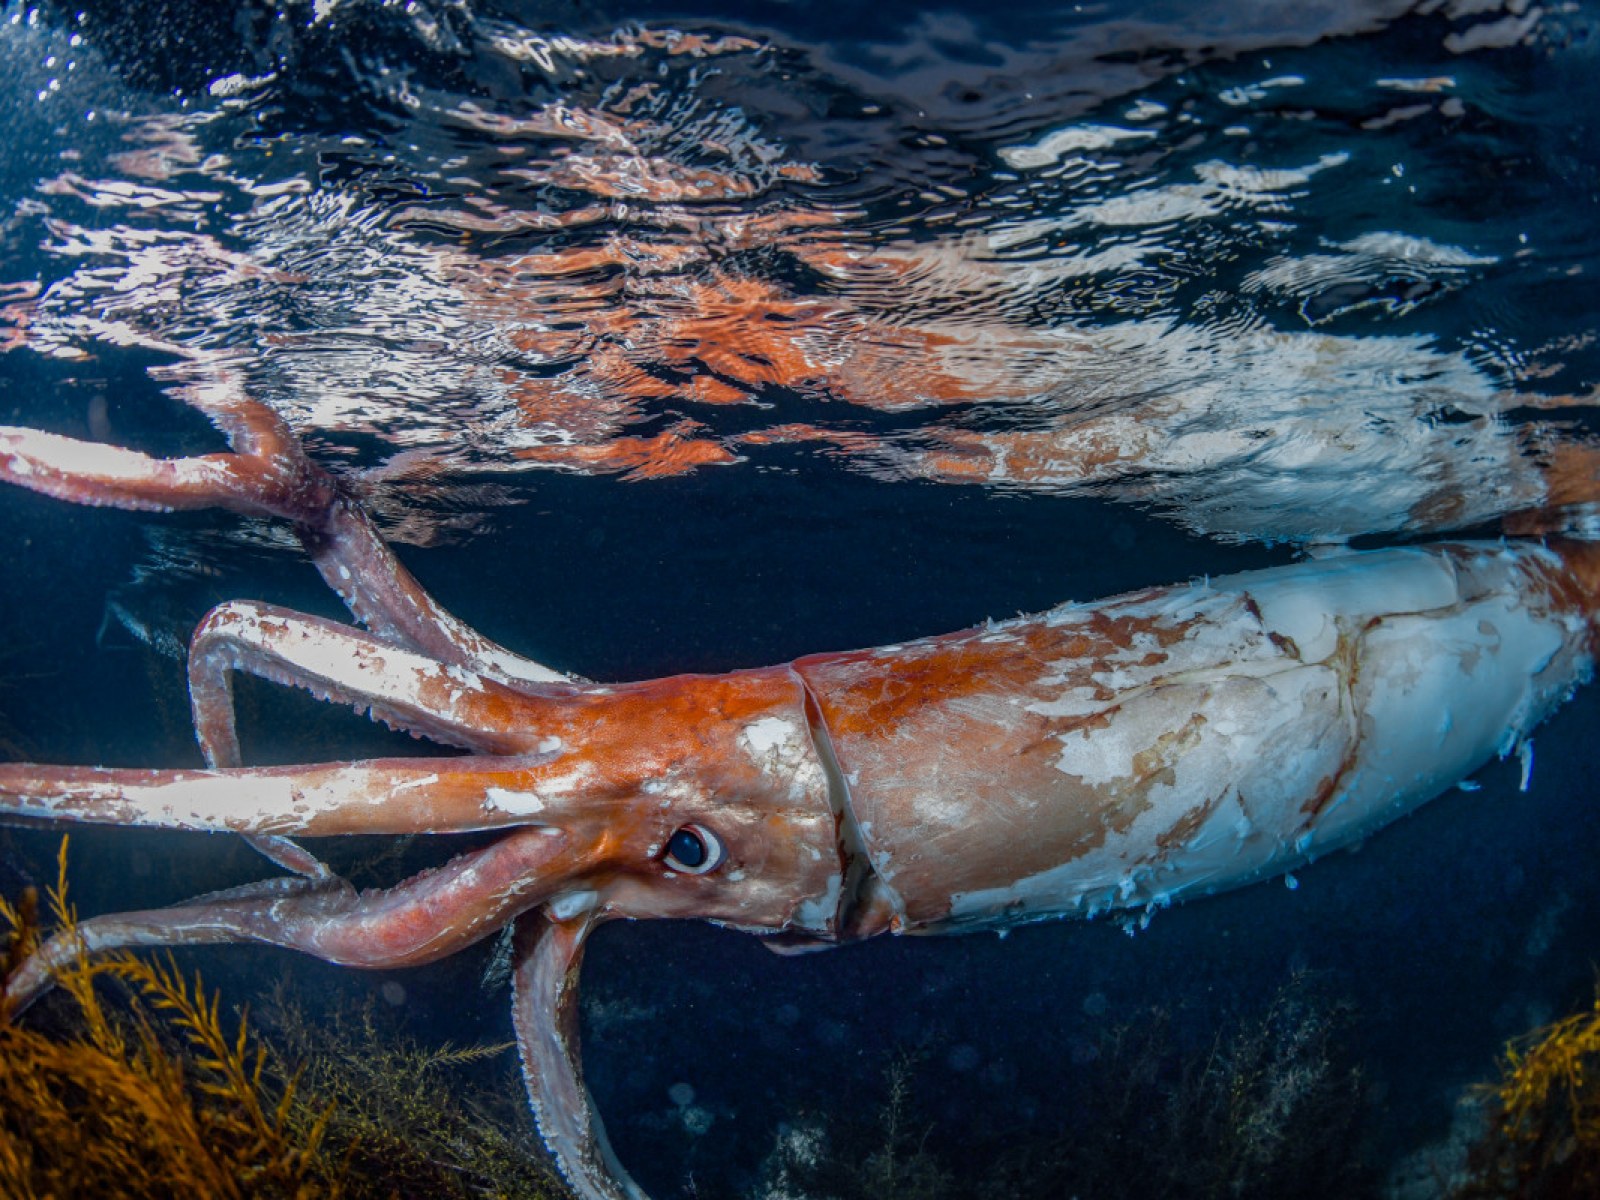 Watch Extremely Rare Footage of Giant Squid With 'Thick Arms': 'Terrified'